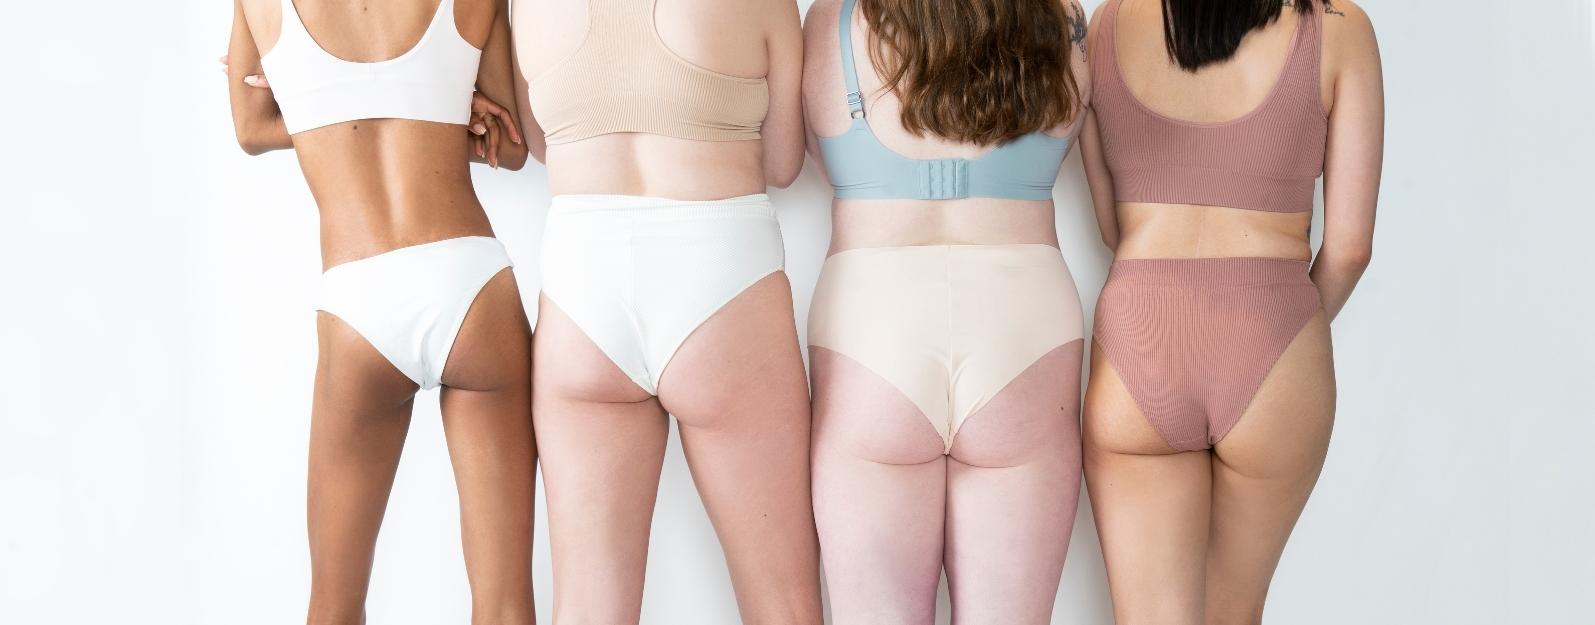 5 Reasons Why You Should Be Moisturizing Your Bum